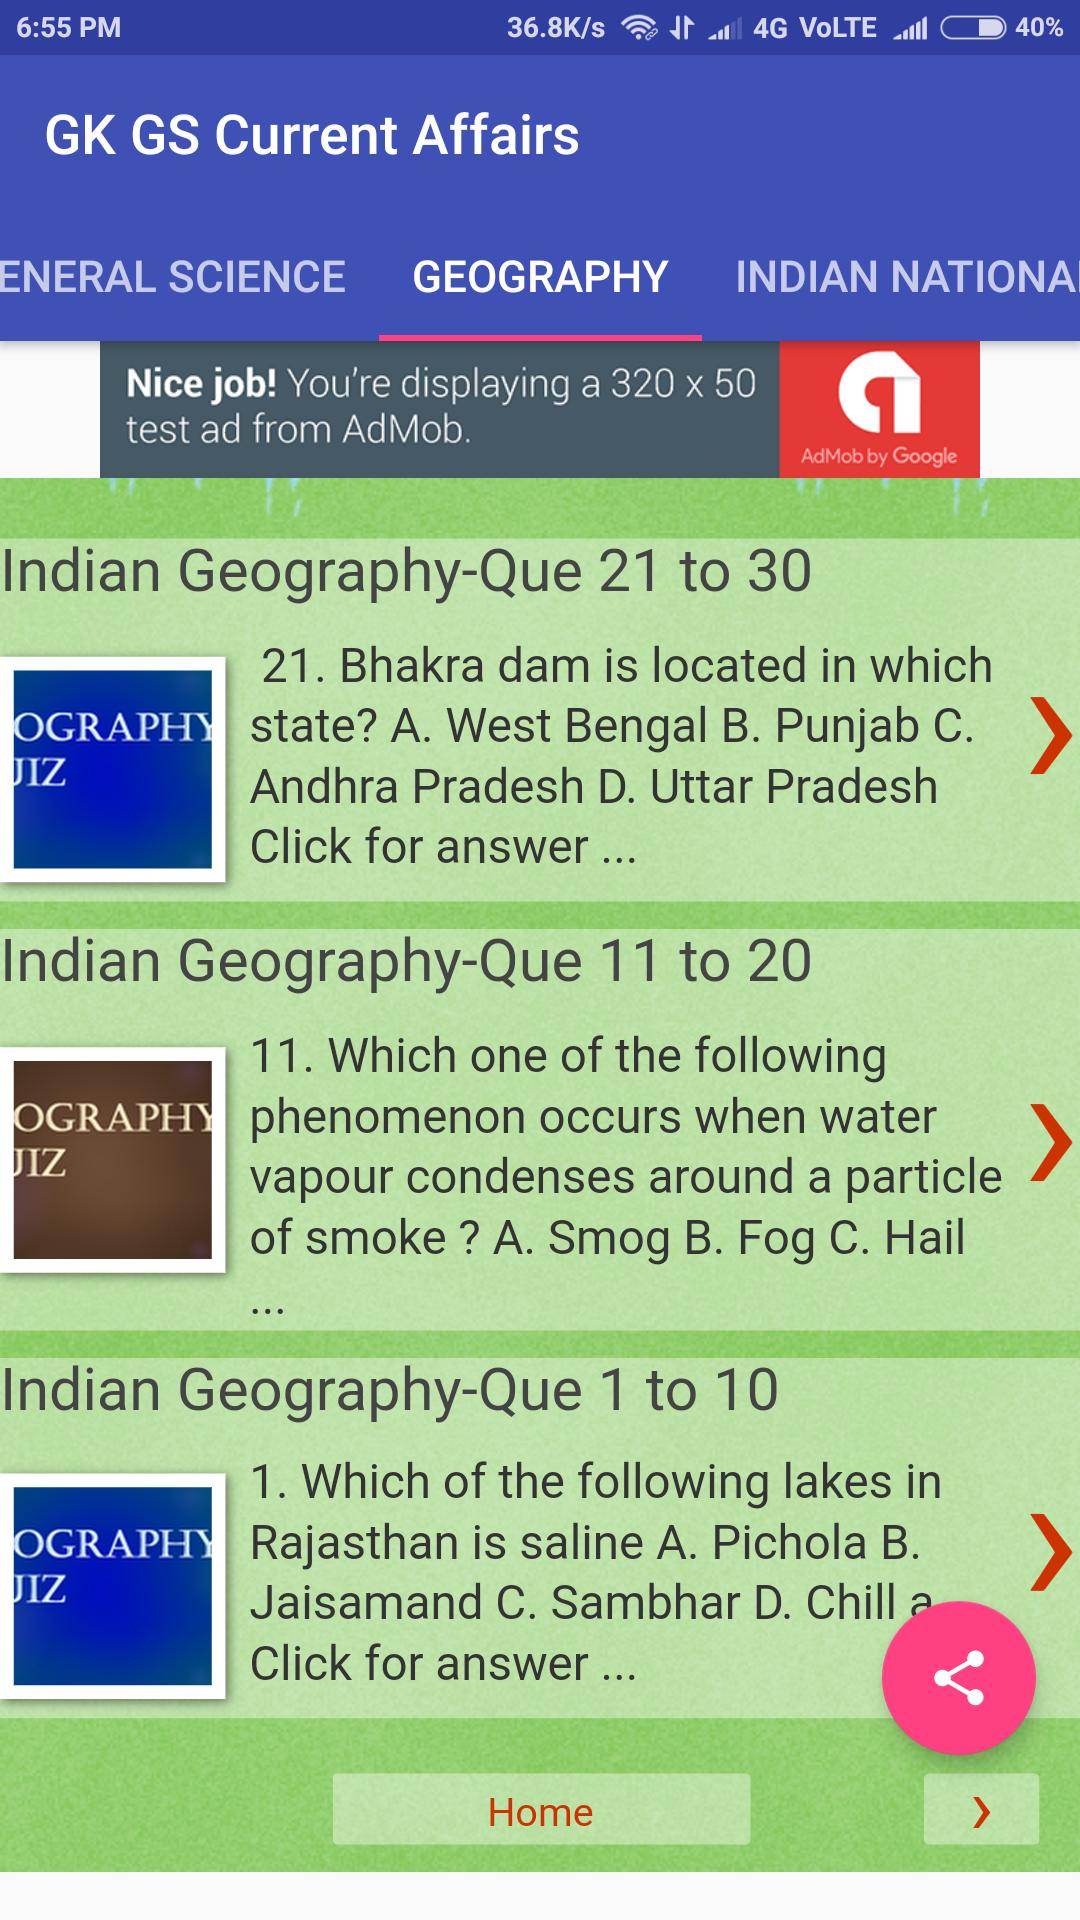 Gk Gs Current Affairs For Android Apk Download